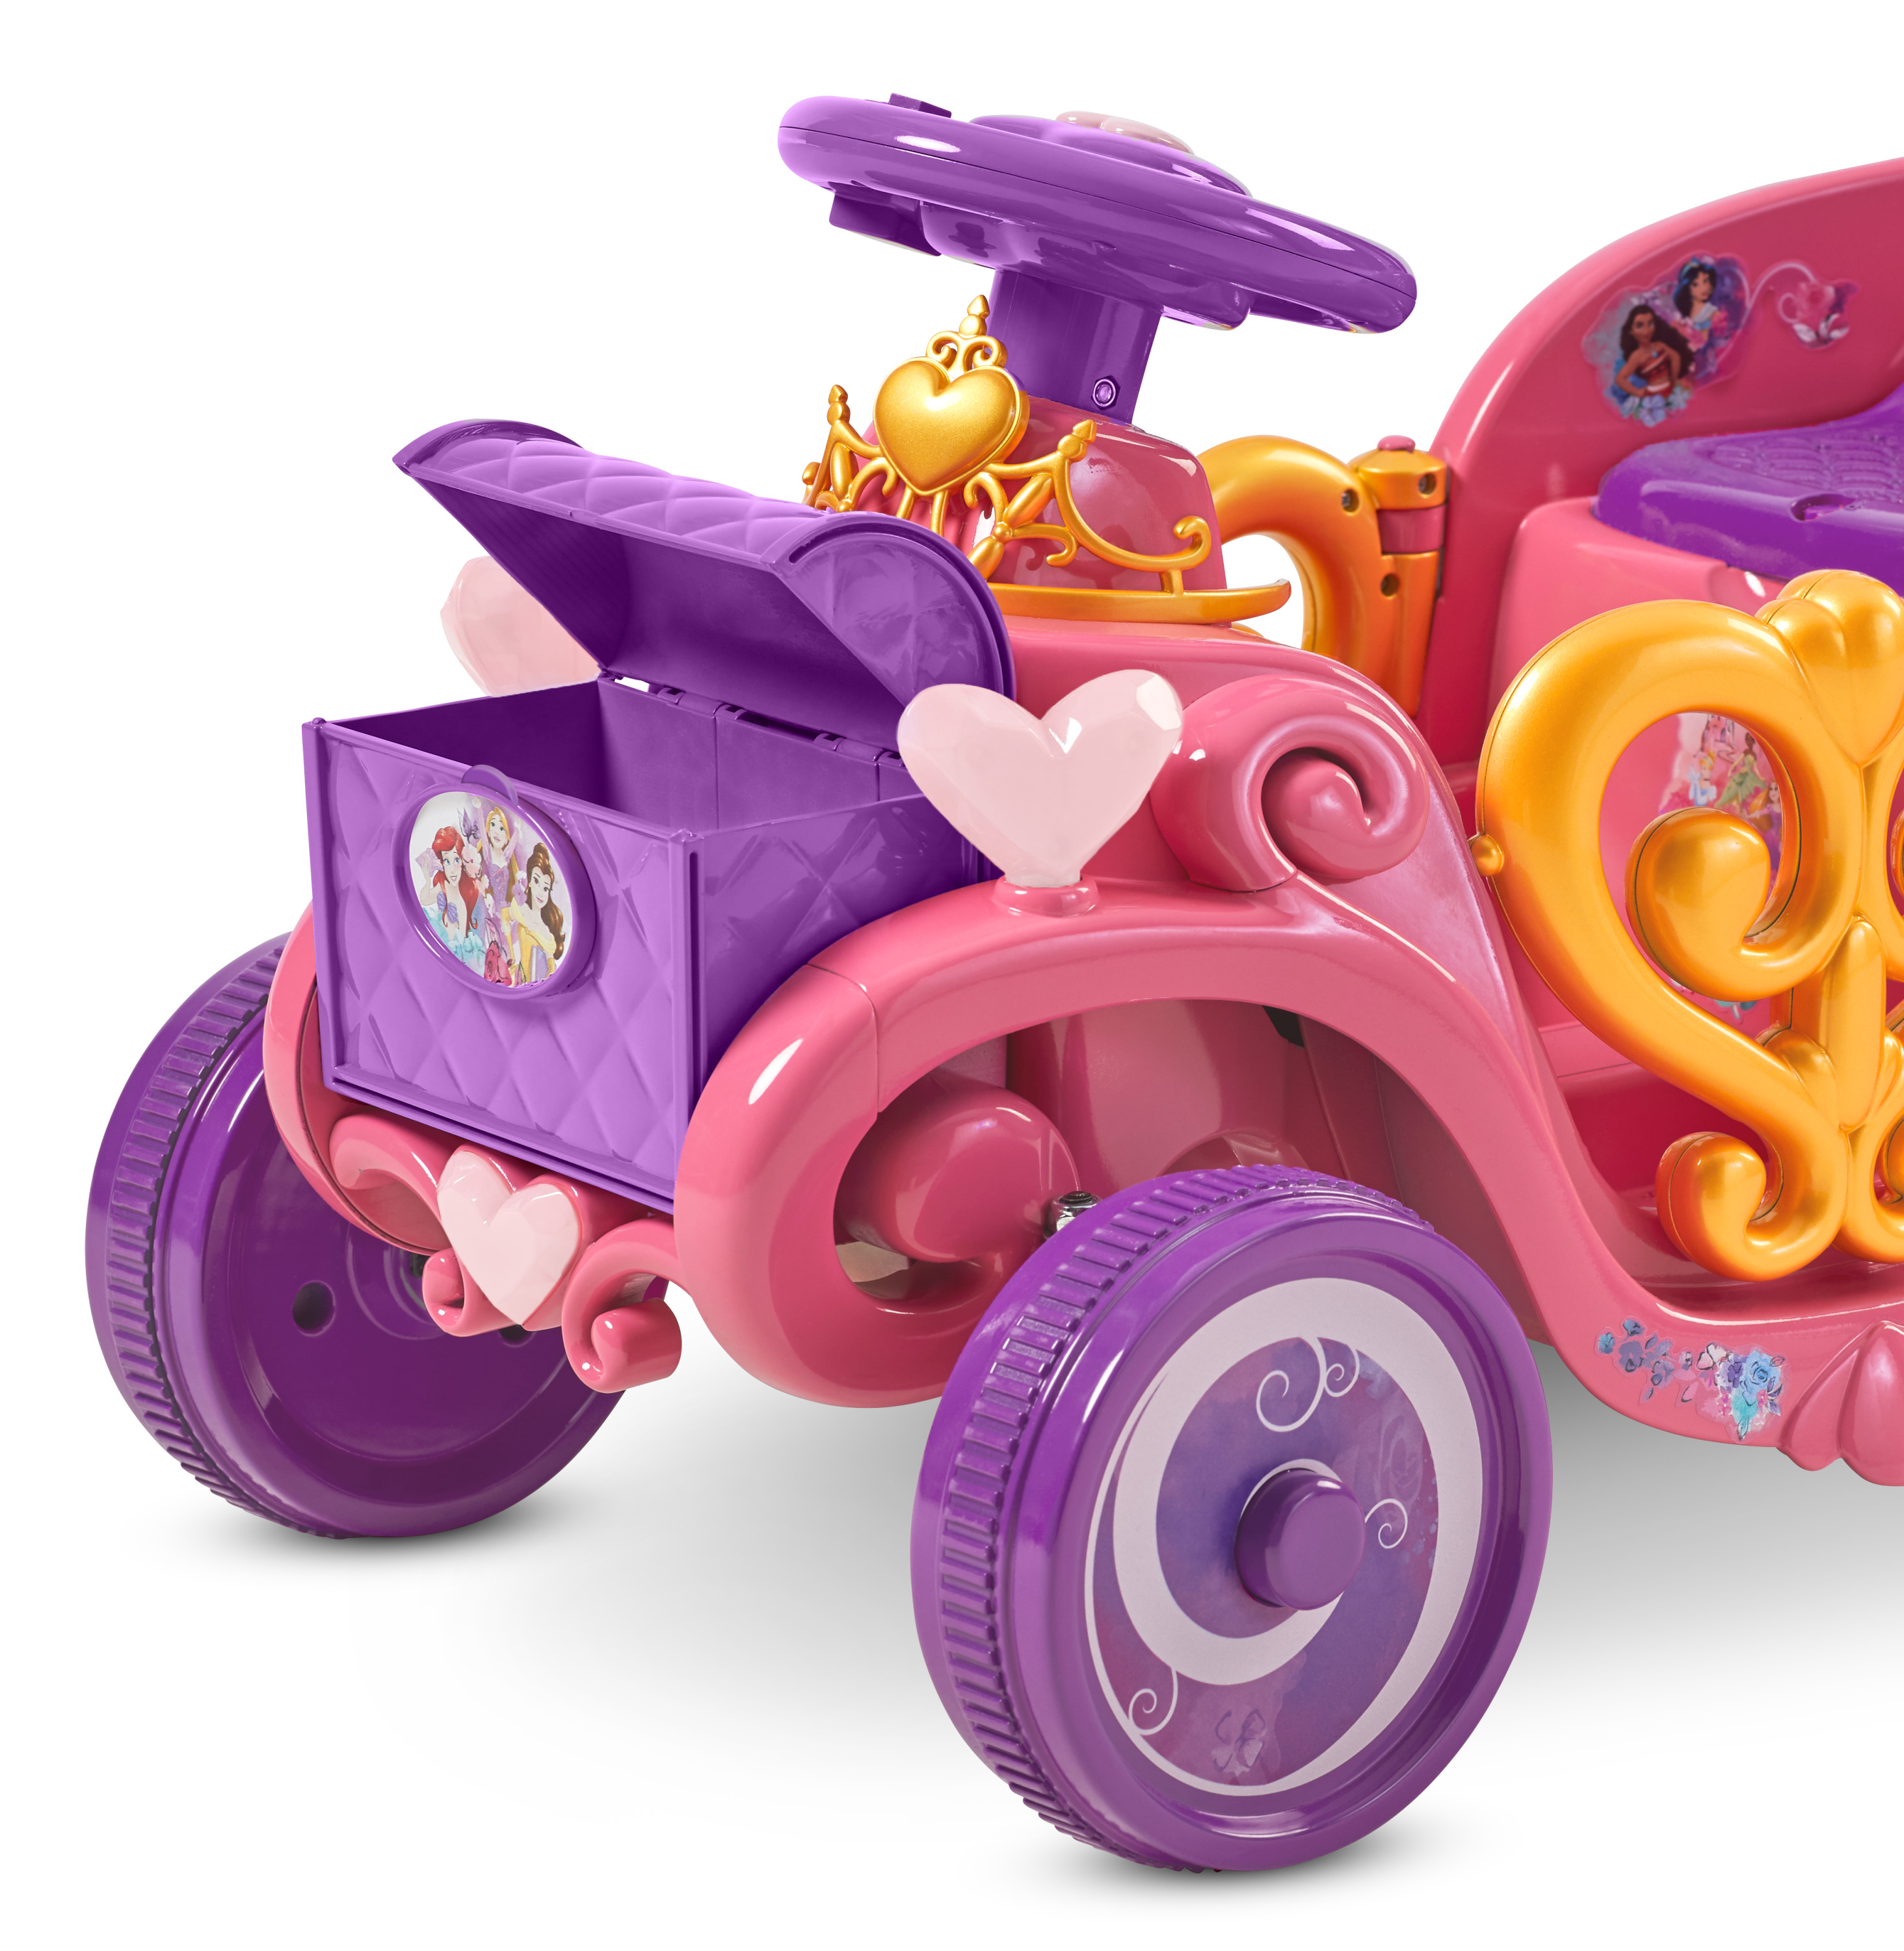 Disney Princess Enchanted Adventure Carriage Quad, 6-Volt Ride-On Toy by Kid Trax, ages 18-30 months, pink - image 5 of 8